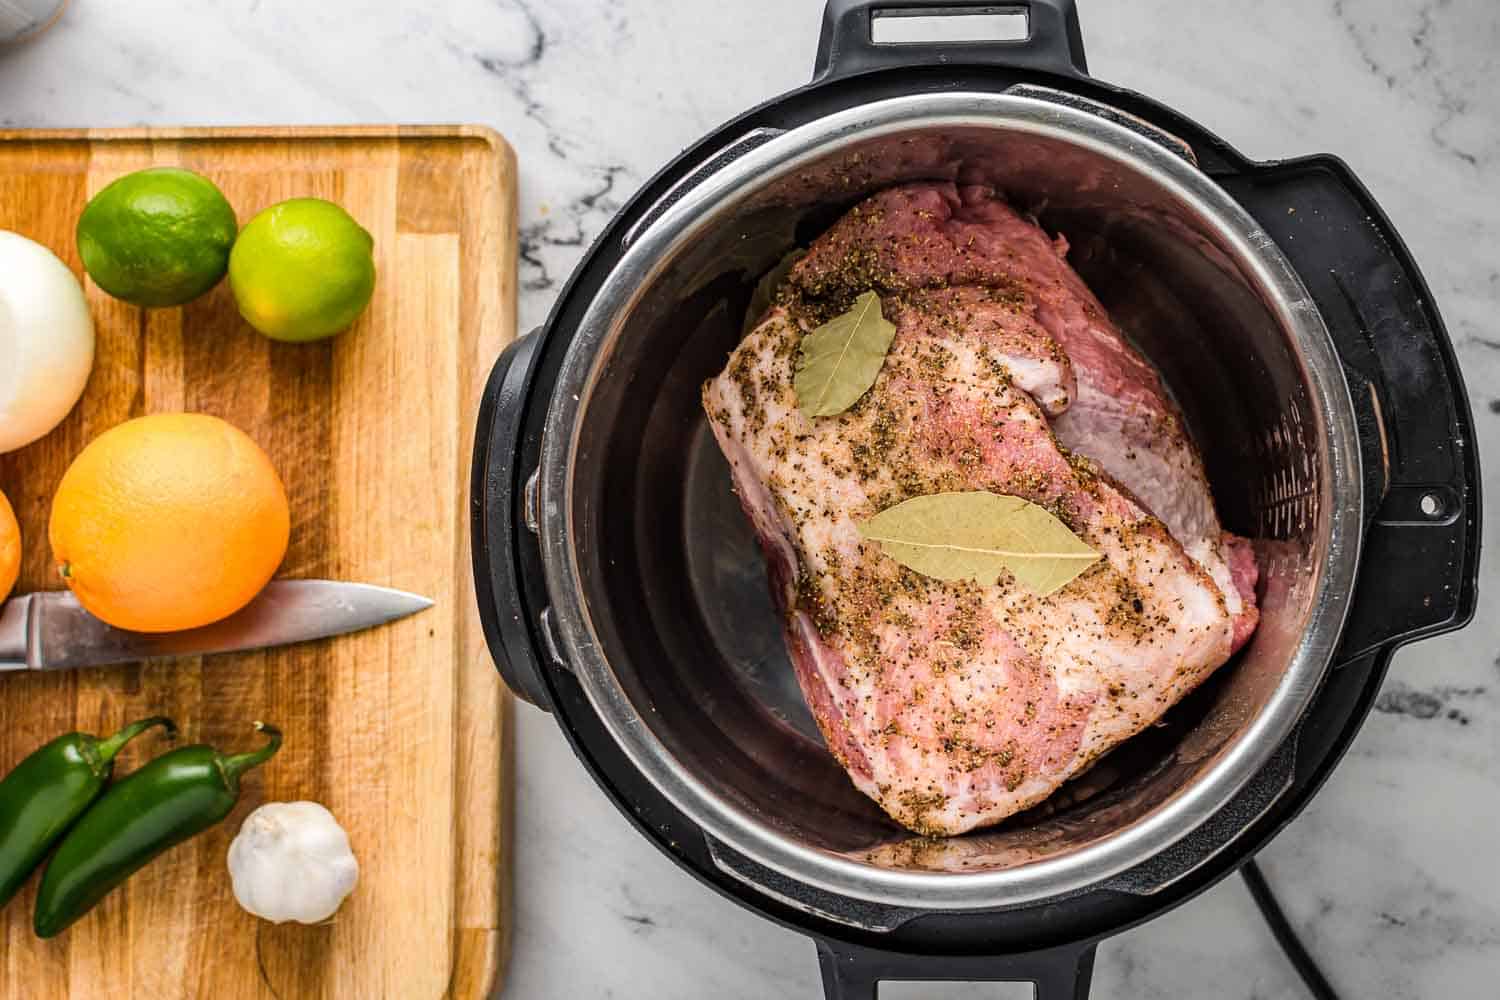 Pork shoulder in the instant pot, and a cutting board with limes, oranges, jalapeños, garlic.